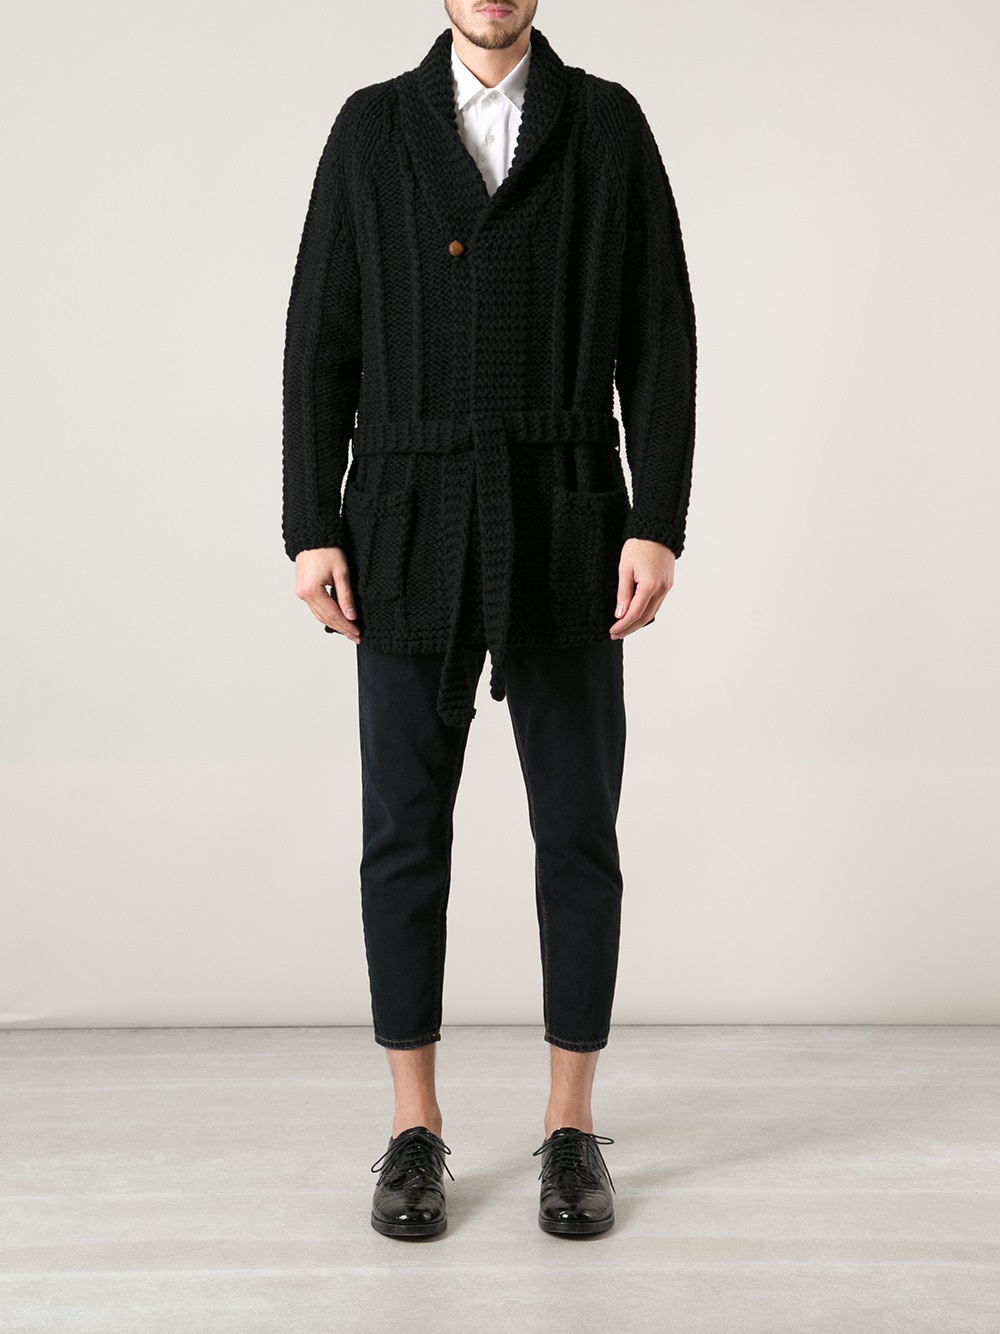 Laneus Knitted Belted Cardigan in Black for Men - Lyst